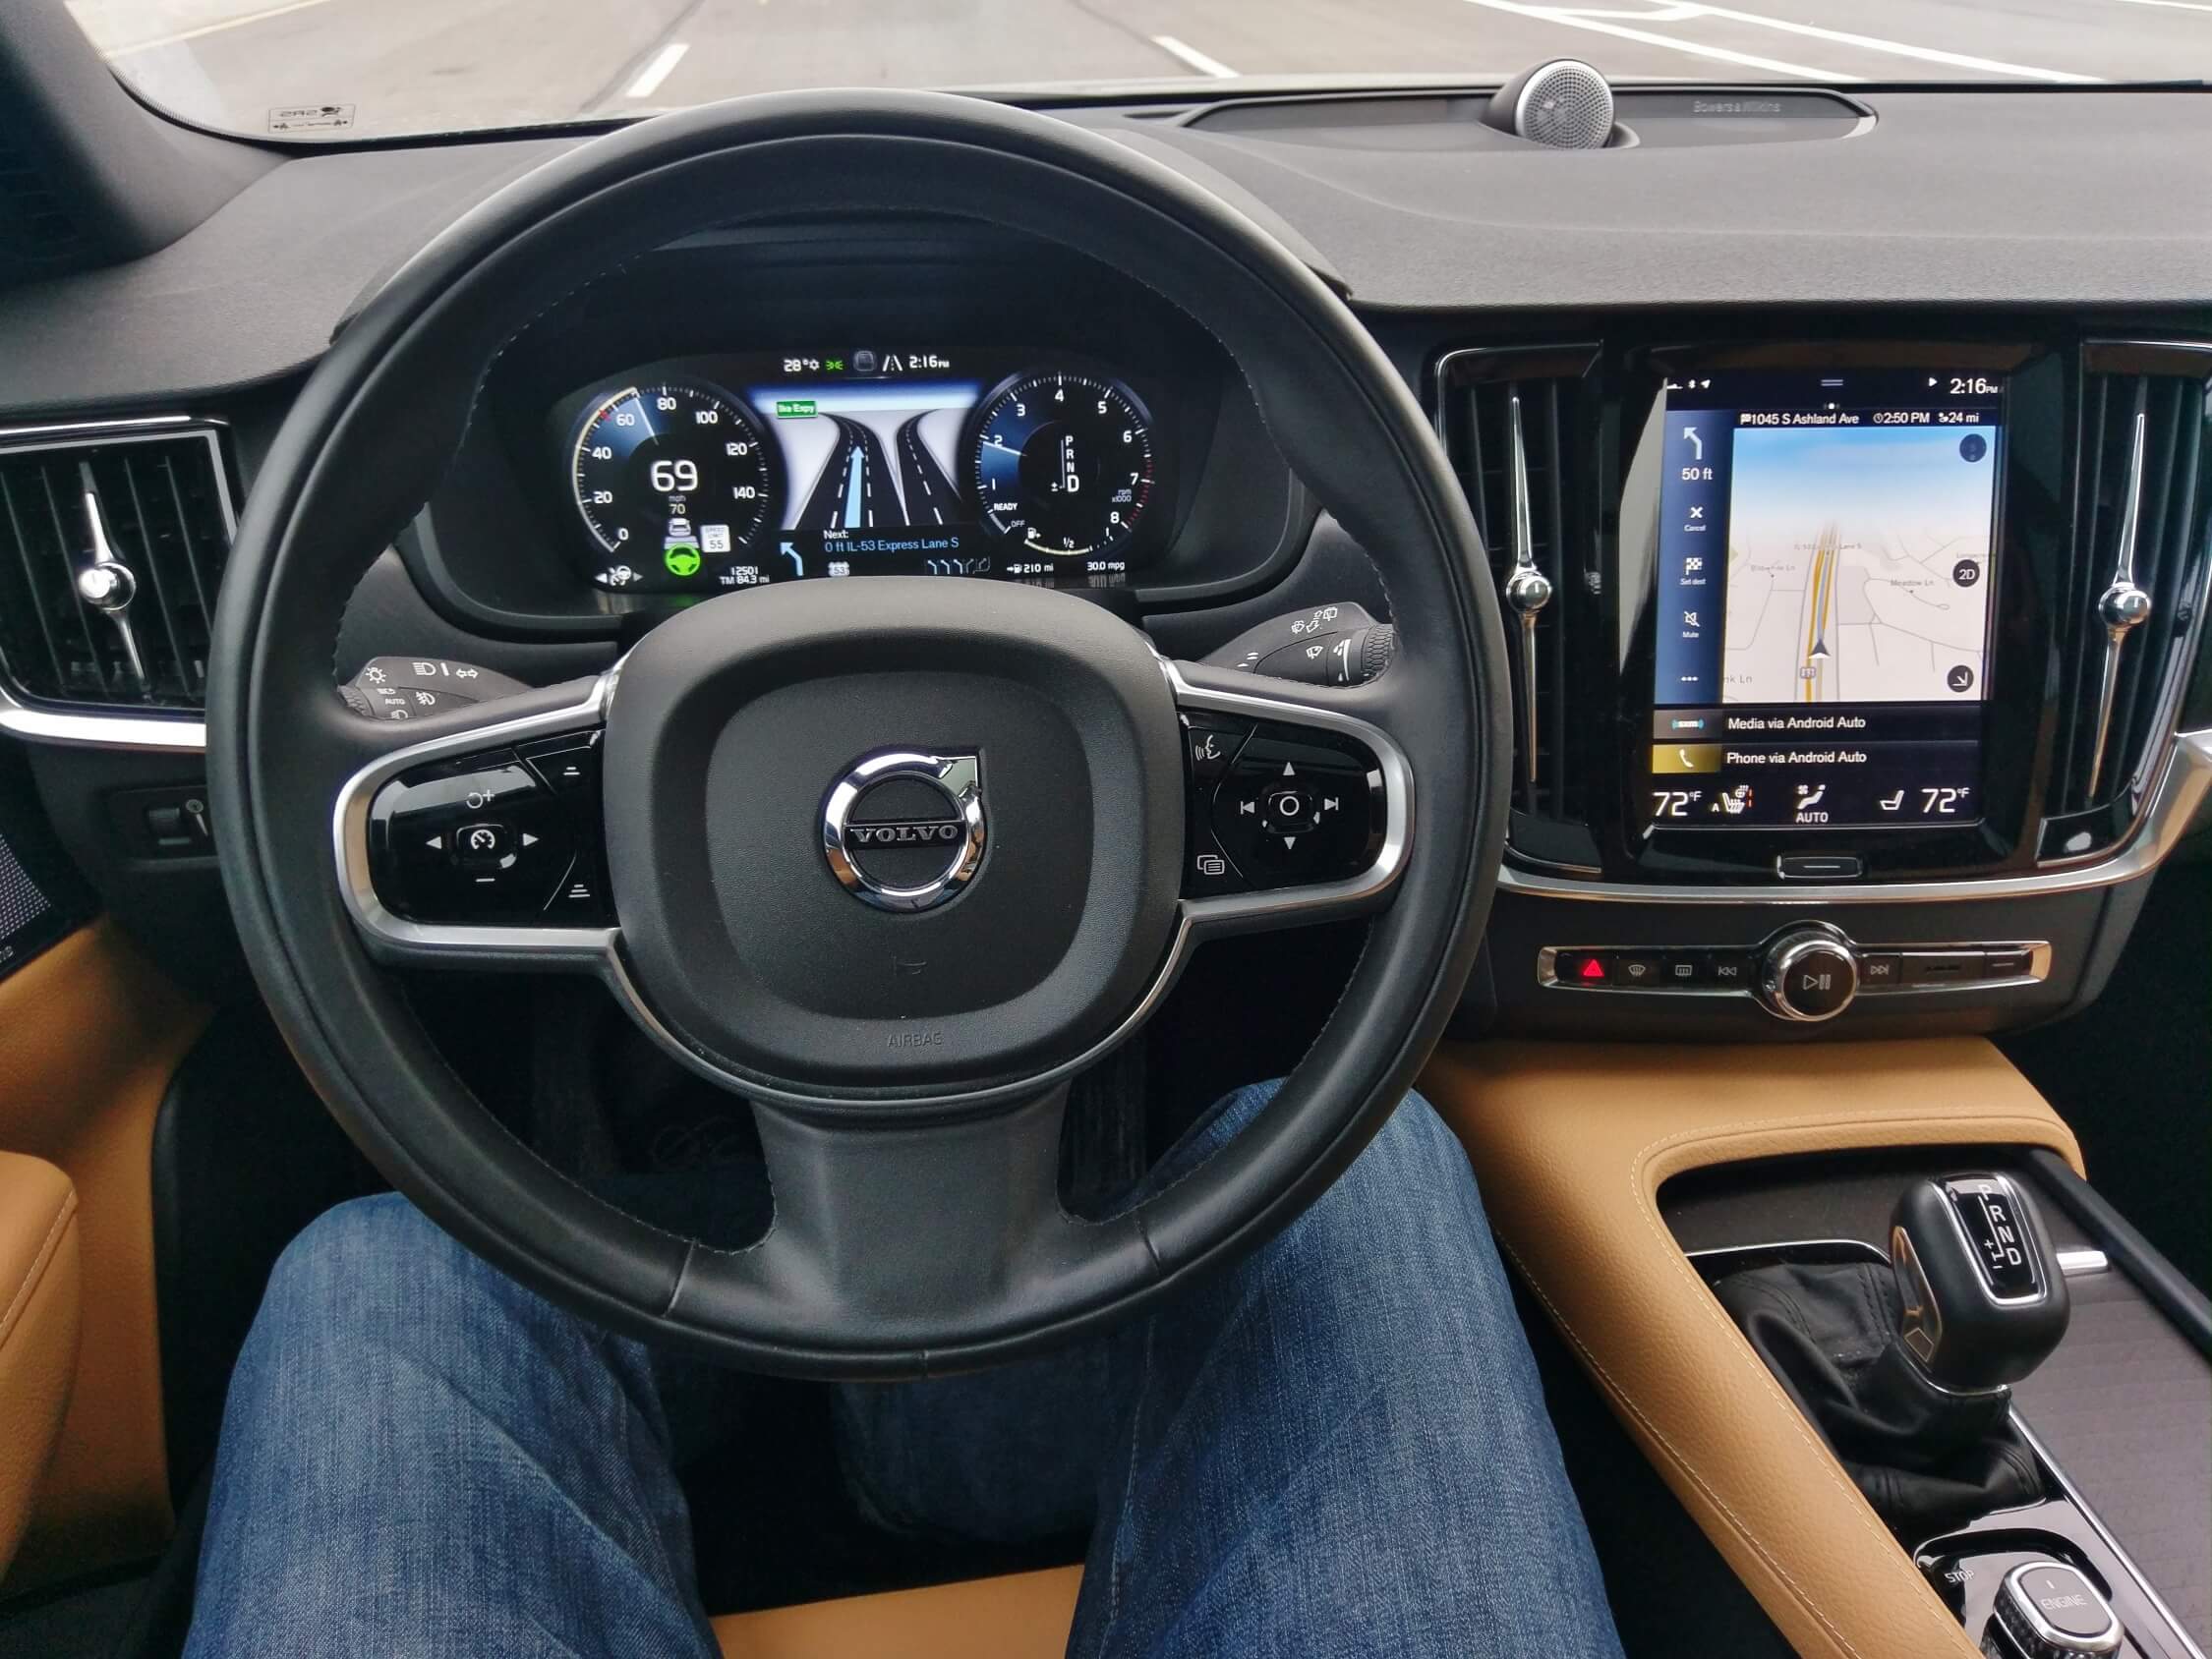 2018 Volvo V90 Cross Country T6: navigating highways w/ vivid 11.2" LCD virtual gauge cluster & vertical tablet 9.0" Sensus 4-pane LCD infotainment touch screen